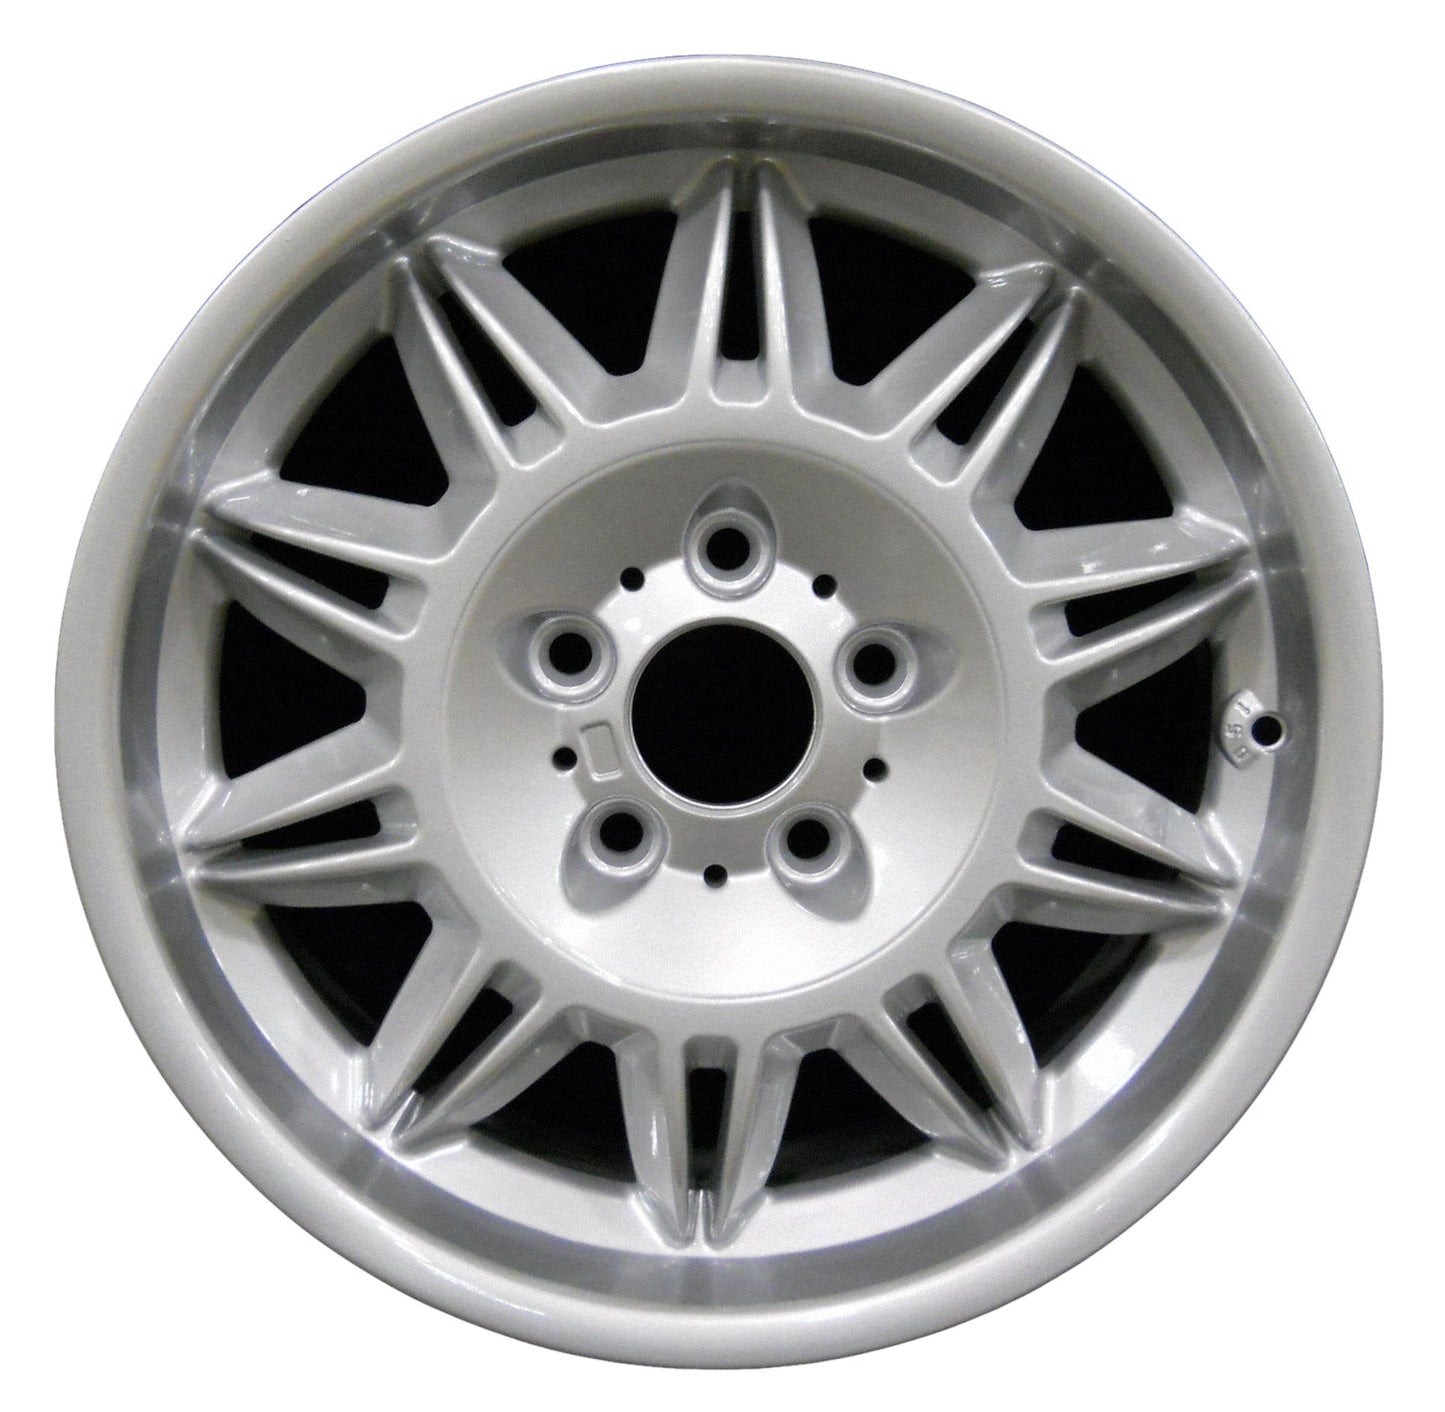 BMW M3  1995, 1996, 1997, 1998, 1999, 2000, 2001, 2002 Factory OEM Car Wheel Size 17x7.5 Alloy WAO.59300FT.PS06.FF